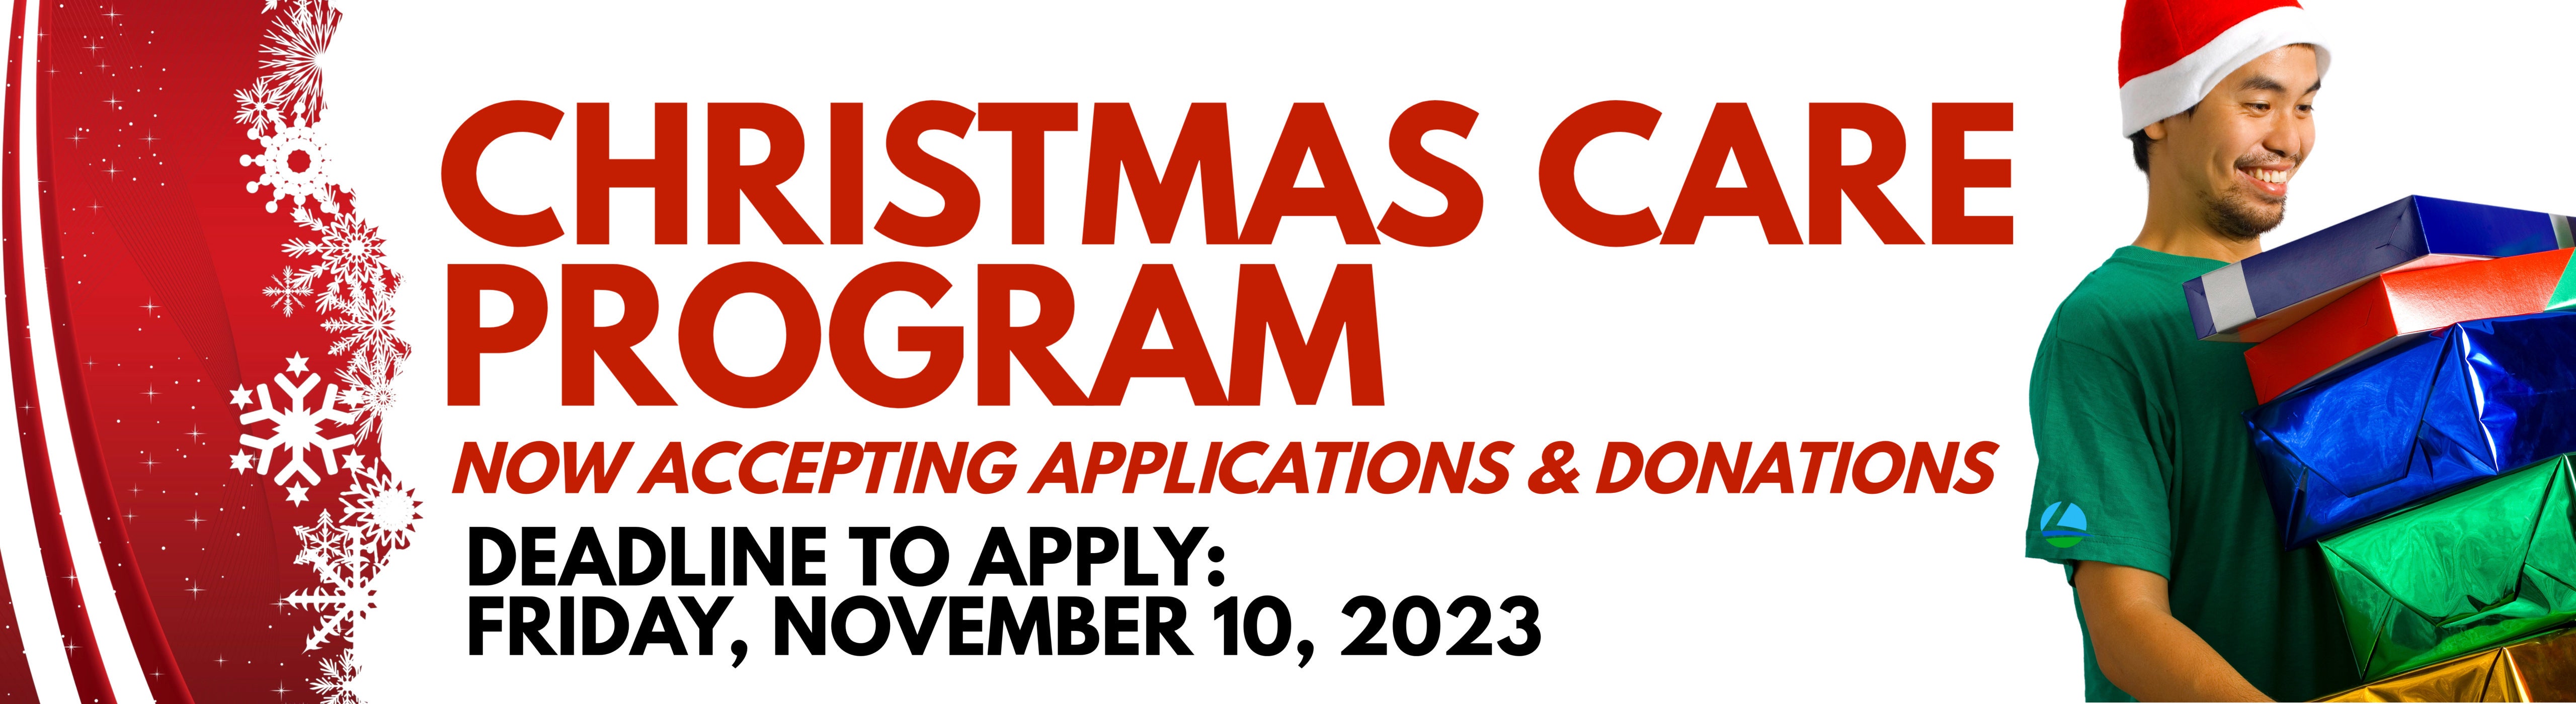 The Christmas Care Program is now accepting applications